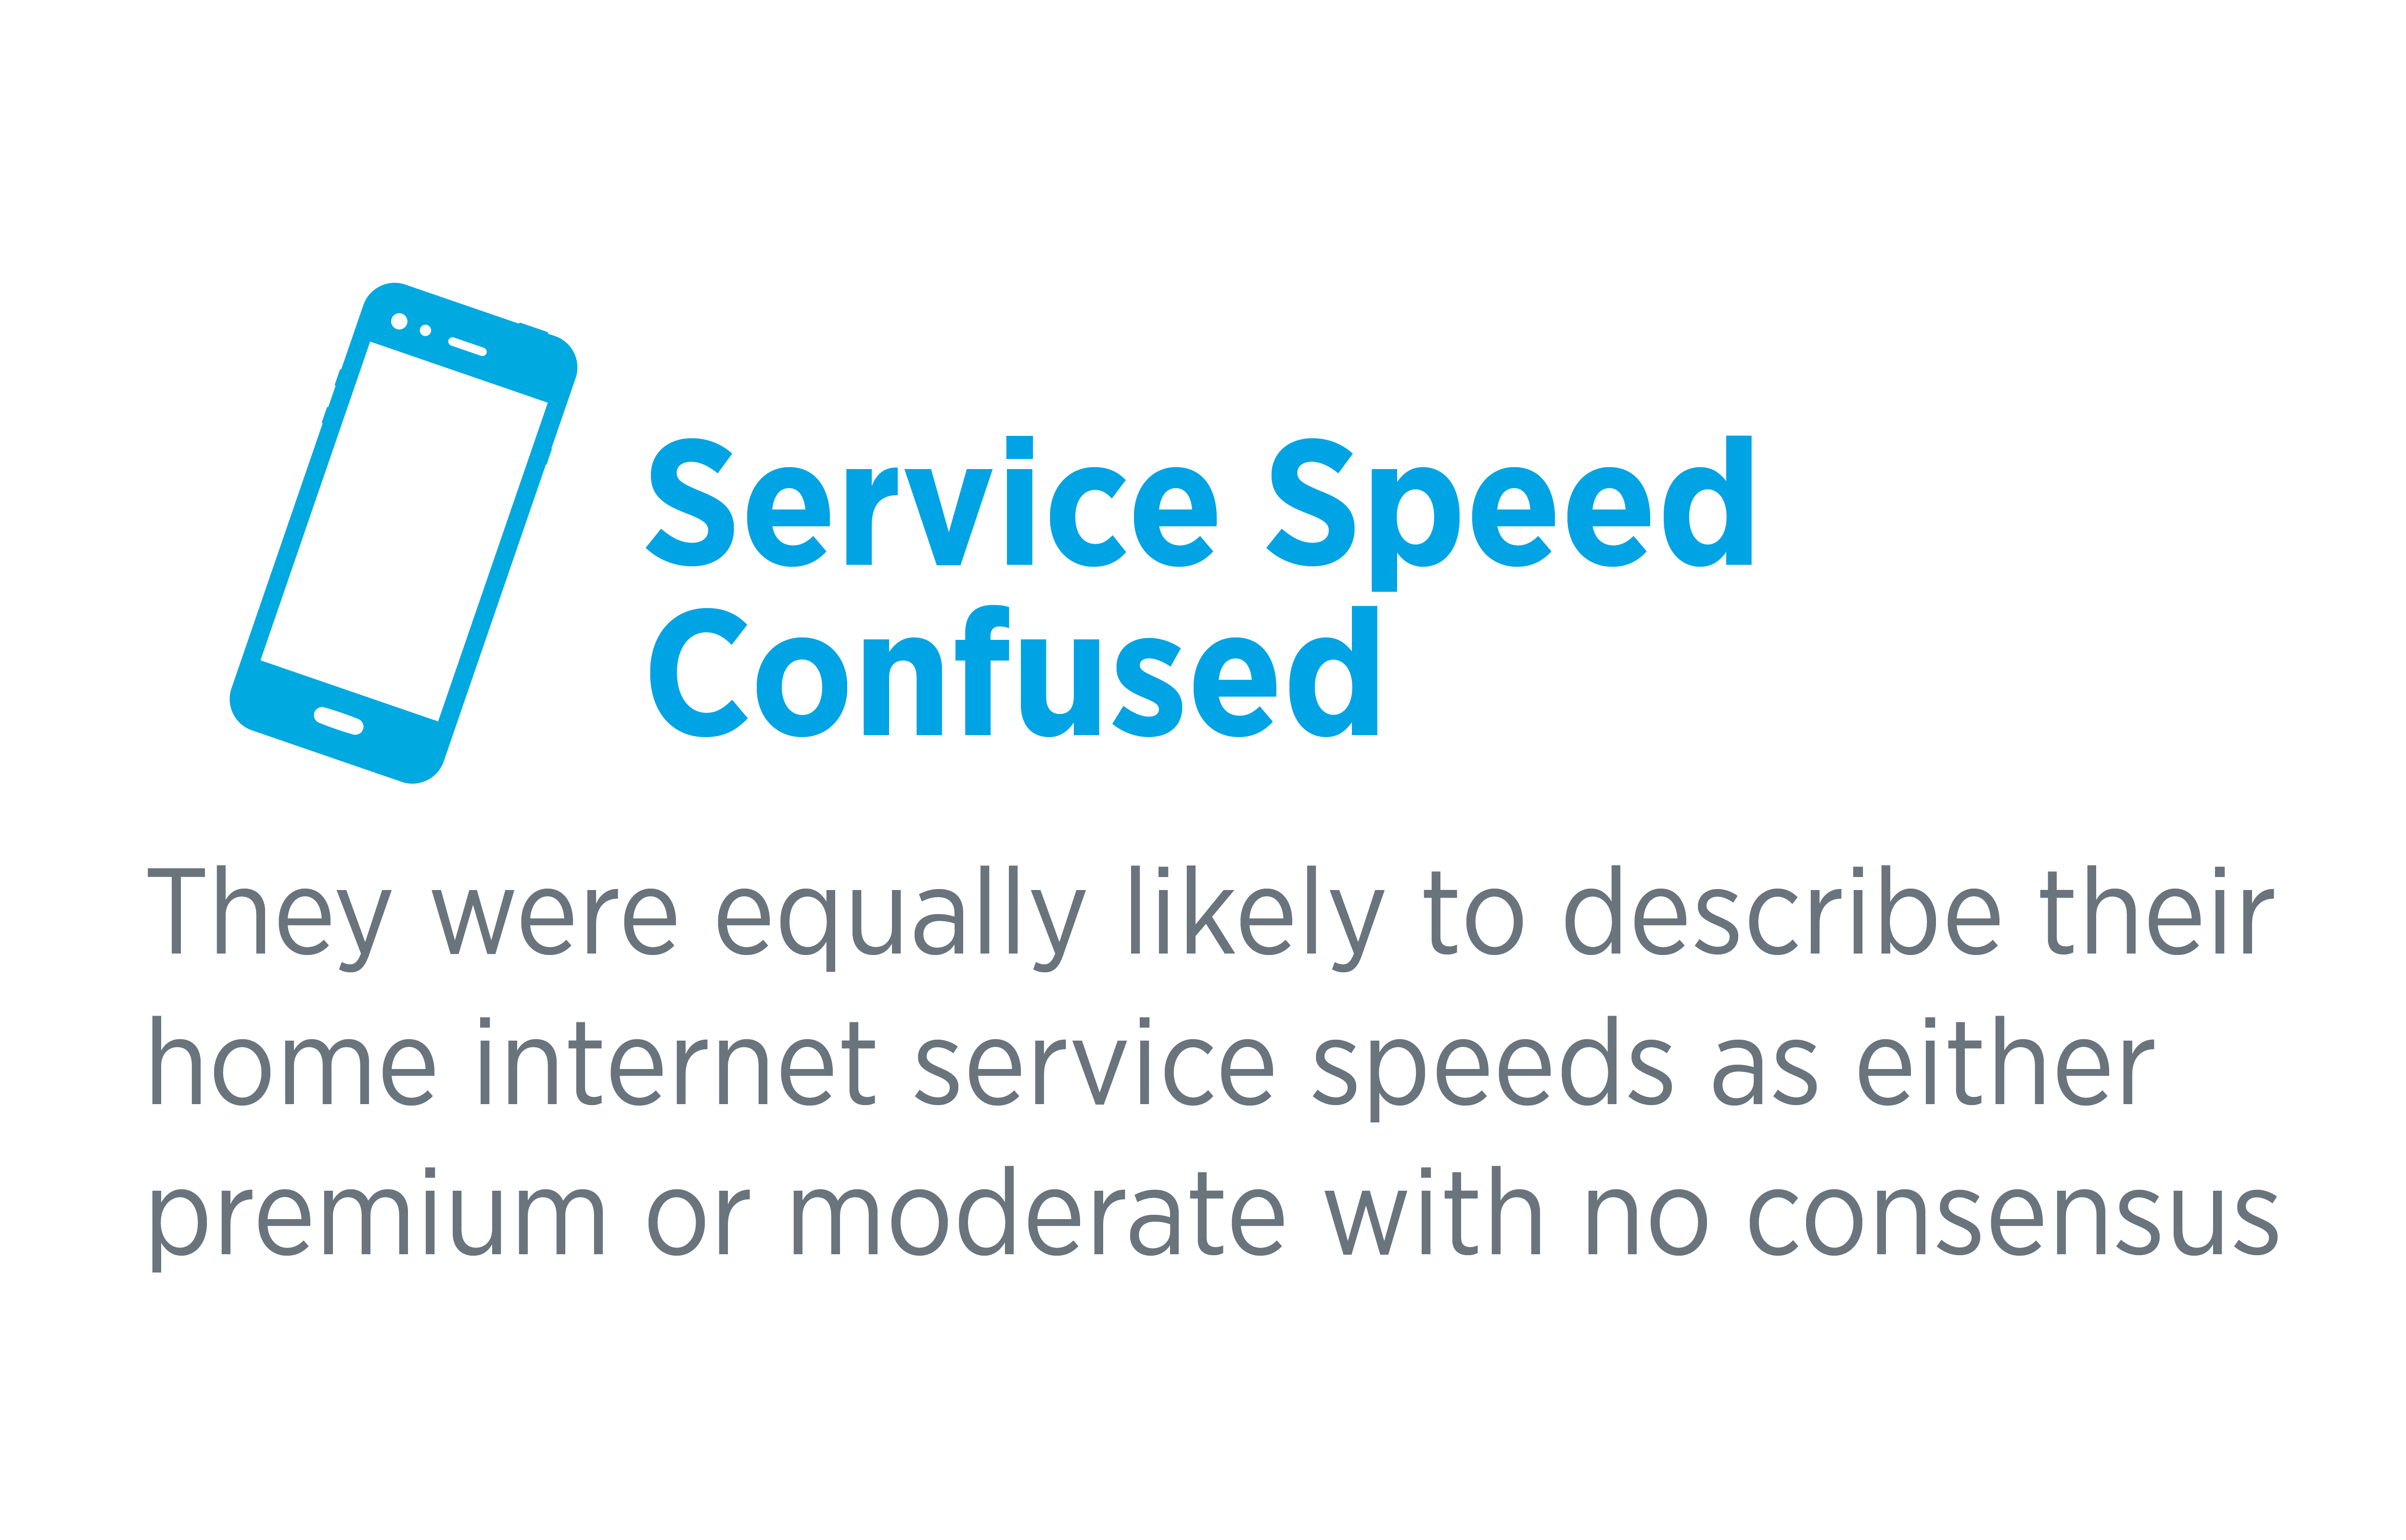 they were equally likely to describe their home internet service speeds as either premium or moderate with no consensus